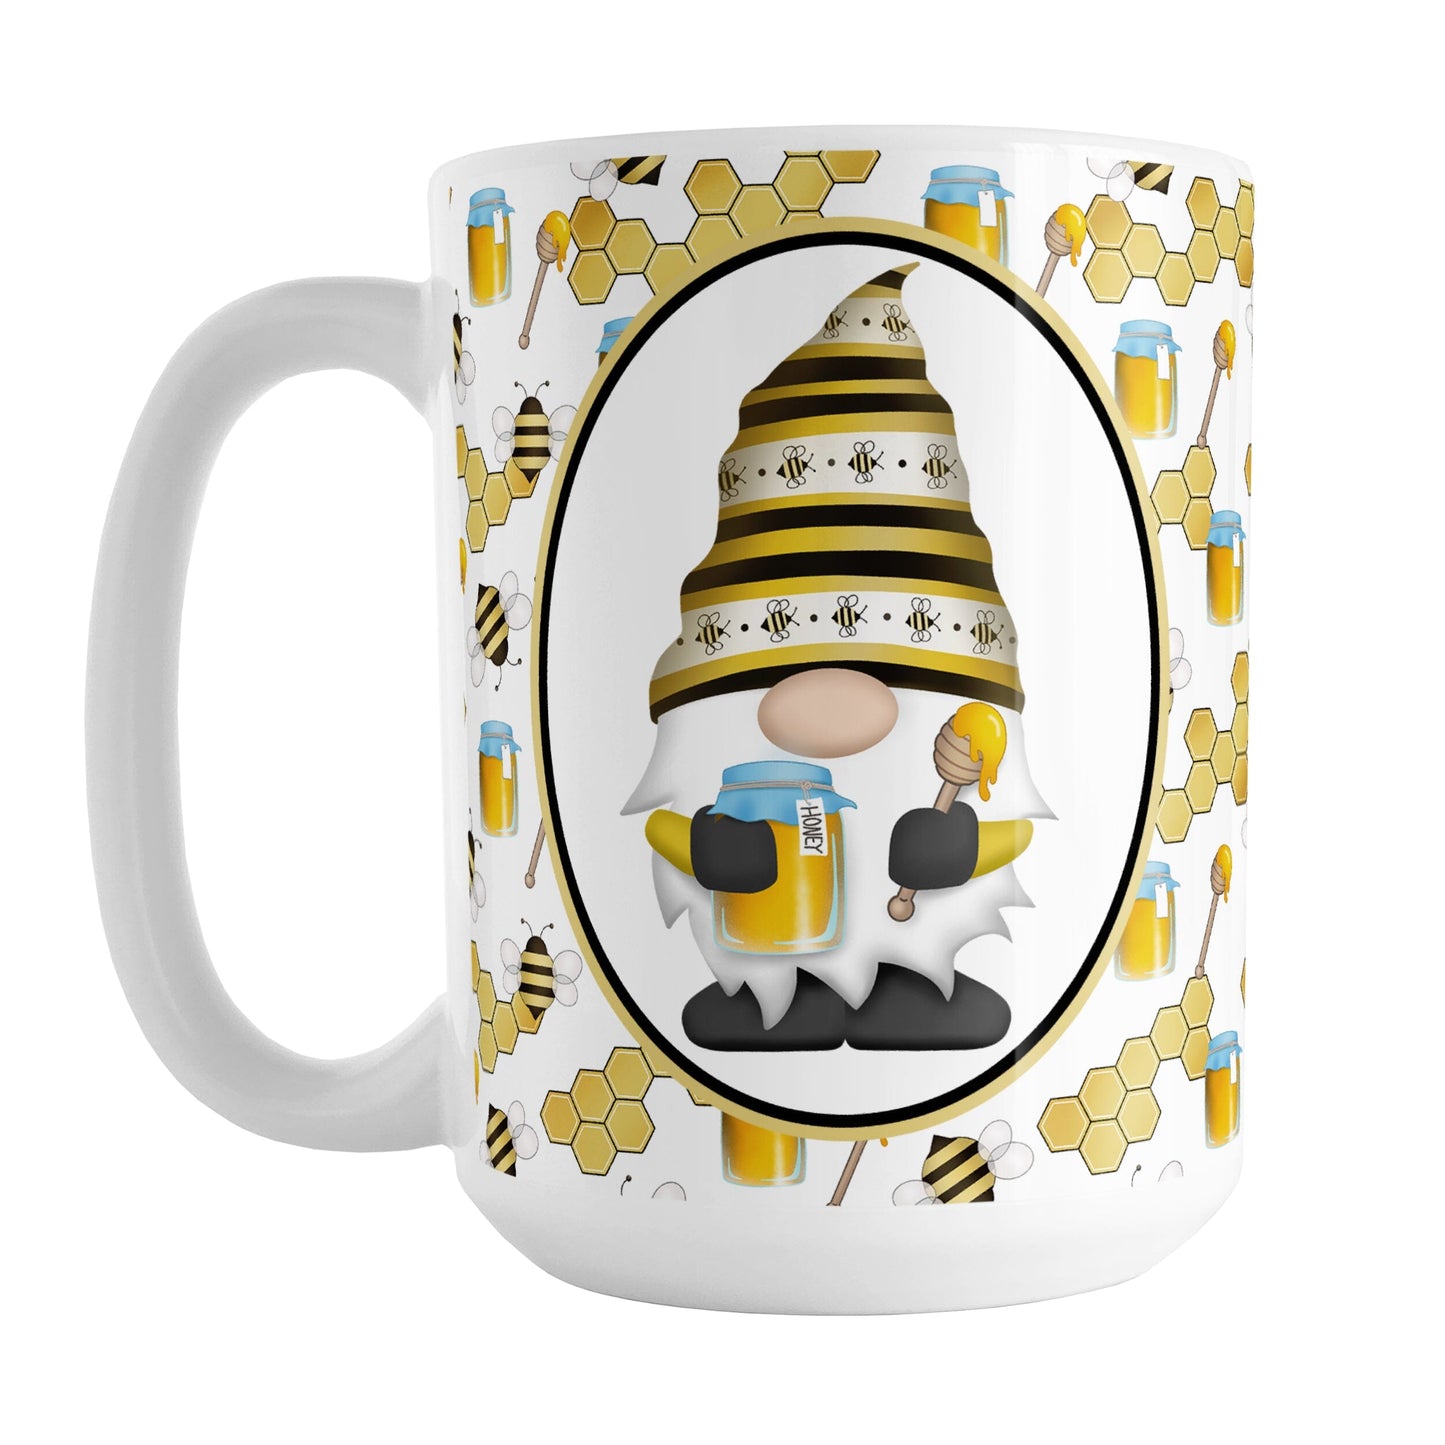 Yellow Gnome Honey Jar Bee Mug (15oz) at Amy's Coffee Mugs. A ceramic coffee mug designed with an adorable gnome wearing a yellow bee-themed hat and holding a honey jar and honey dipper in a white oval over a pattern background that wraps around the mug to the handle with bees, honey jars, honey dippers, and honeycomb.